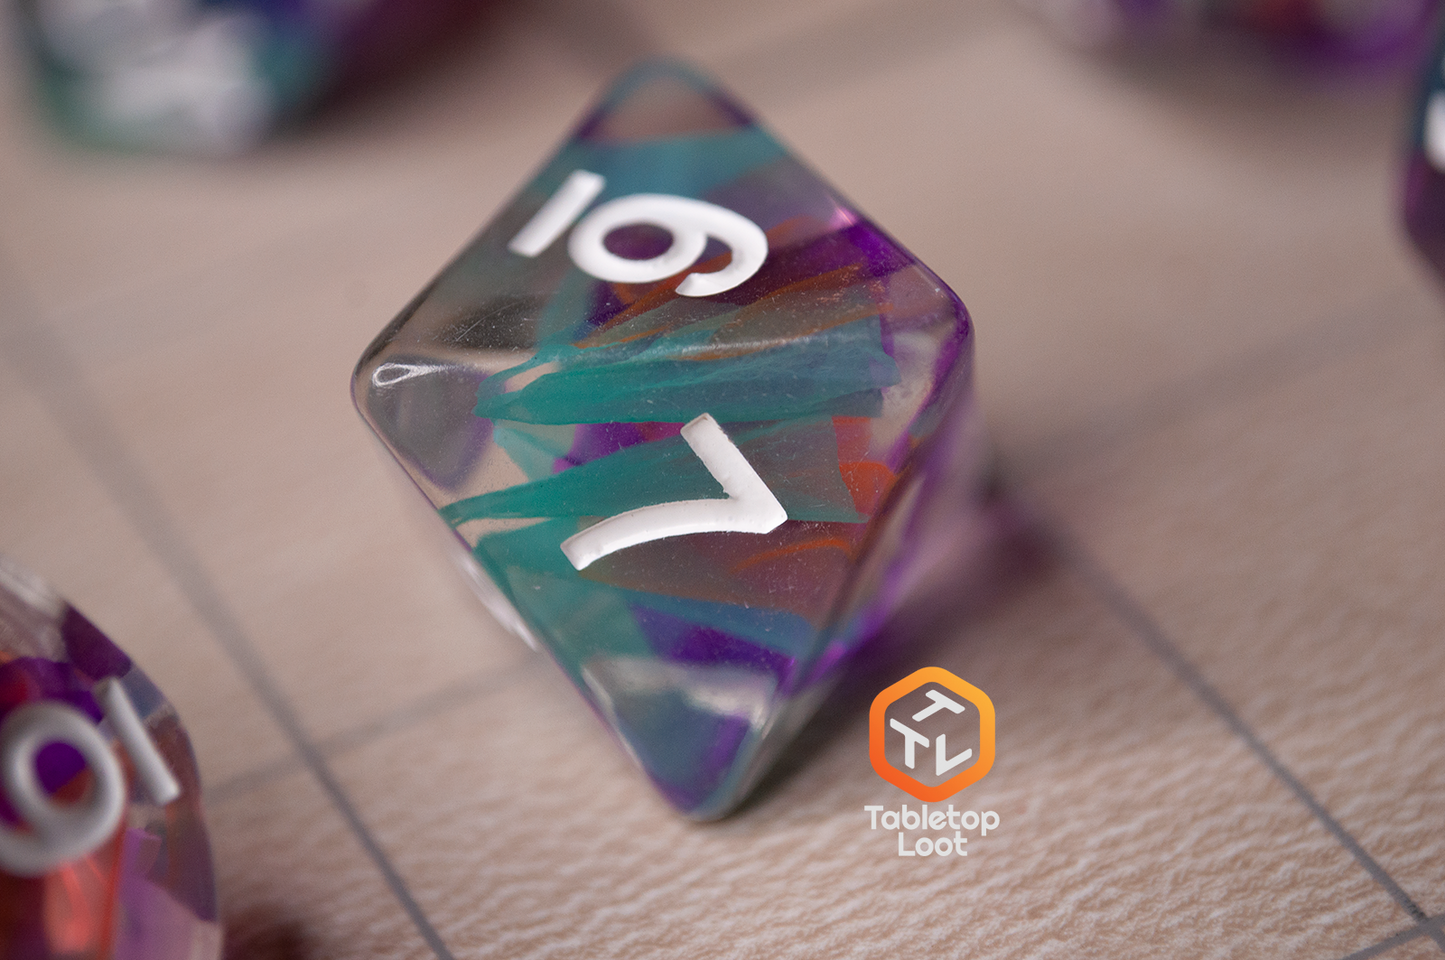 A close up of the Raise the Banners D8 made with strips of color swirled through the middle of clear resin.